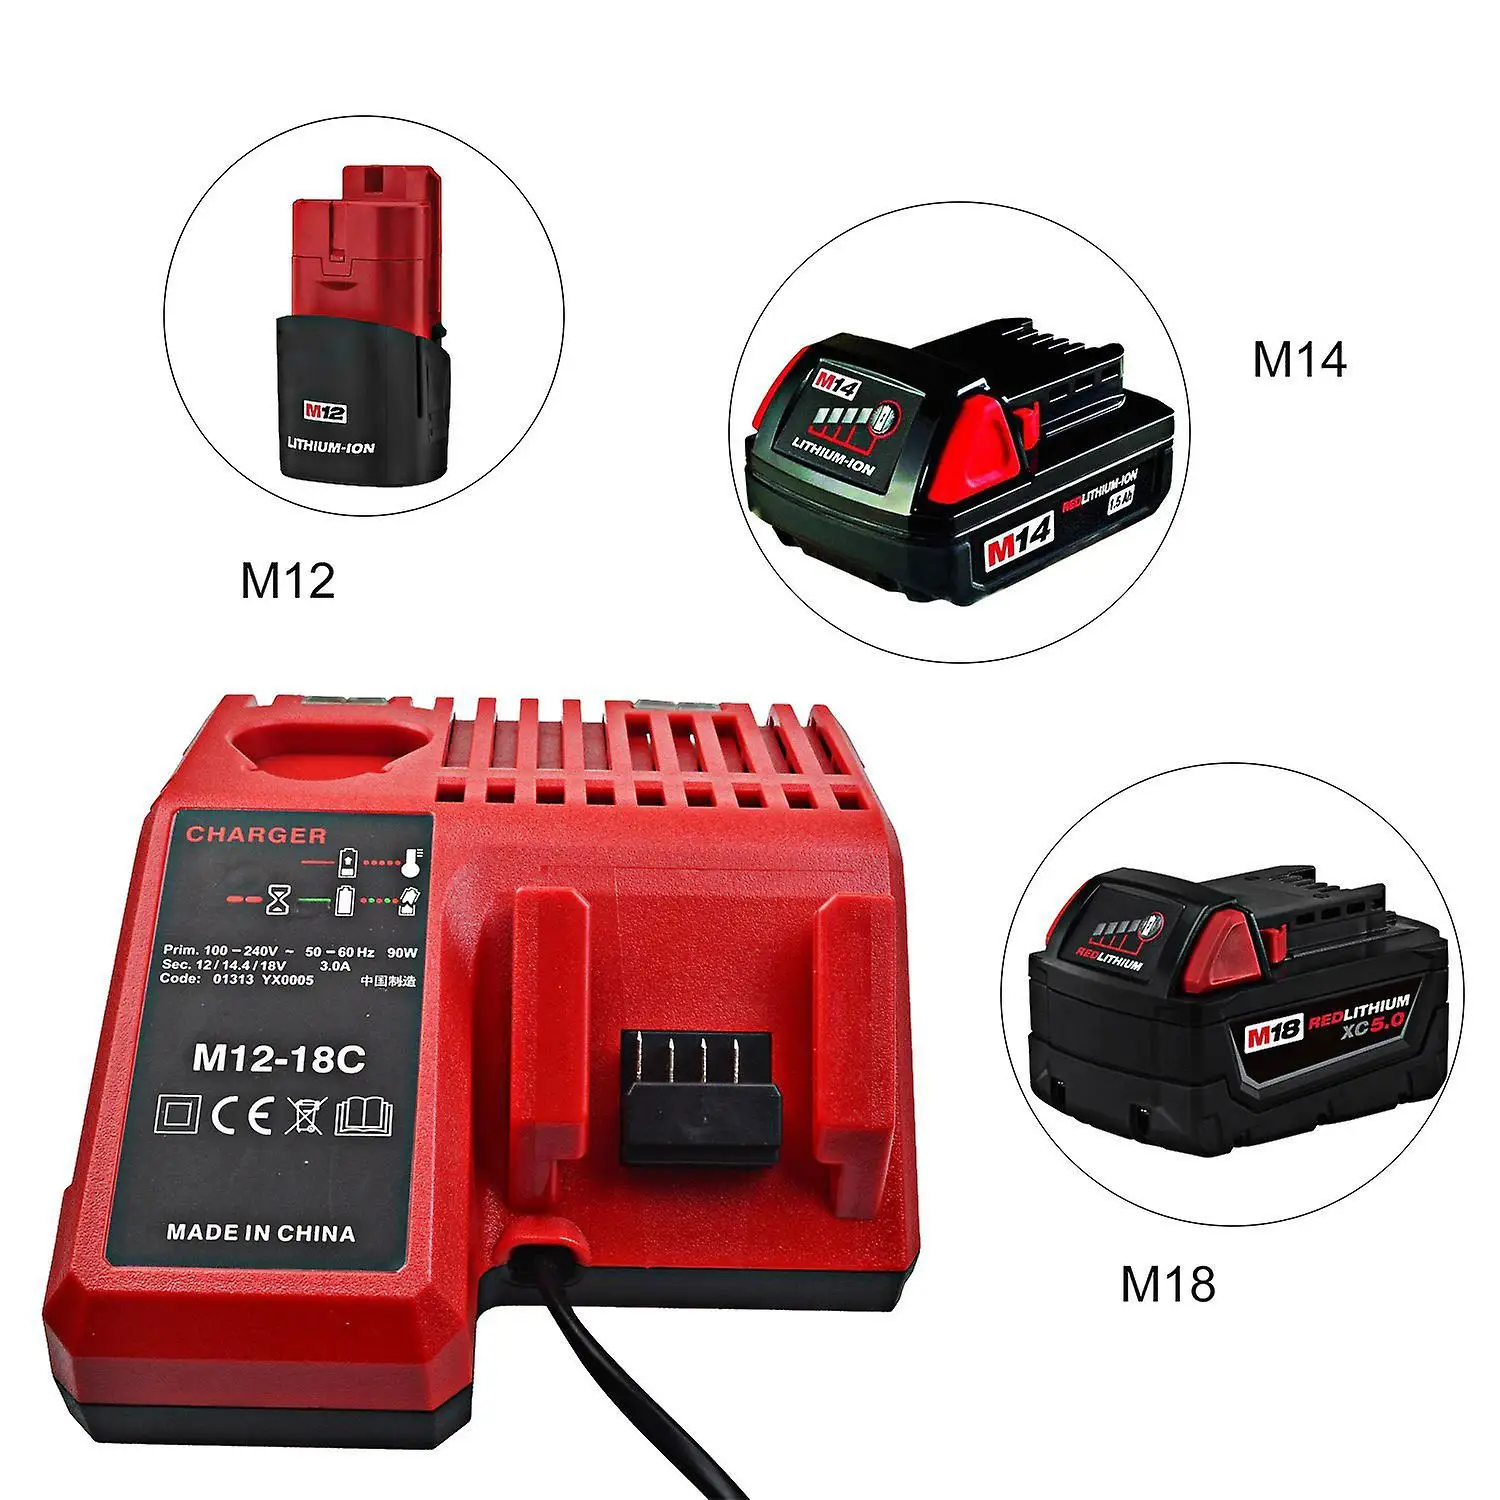 Chargeur universel M12-18C - MILWAUKEE